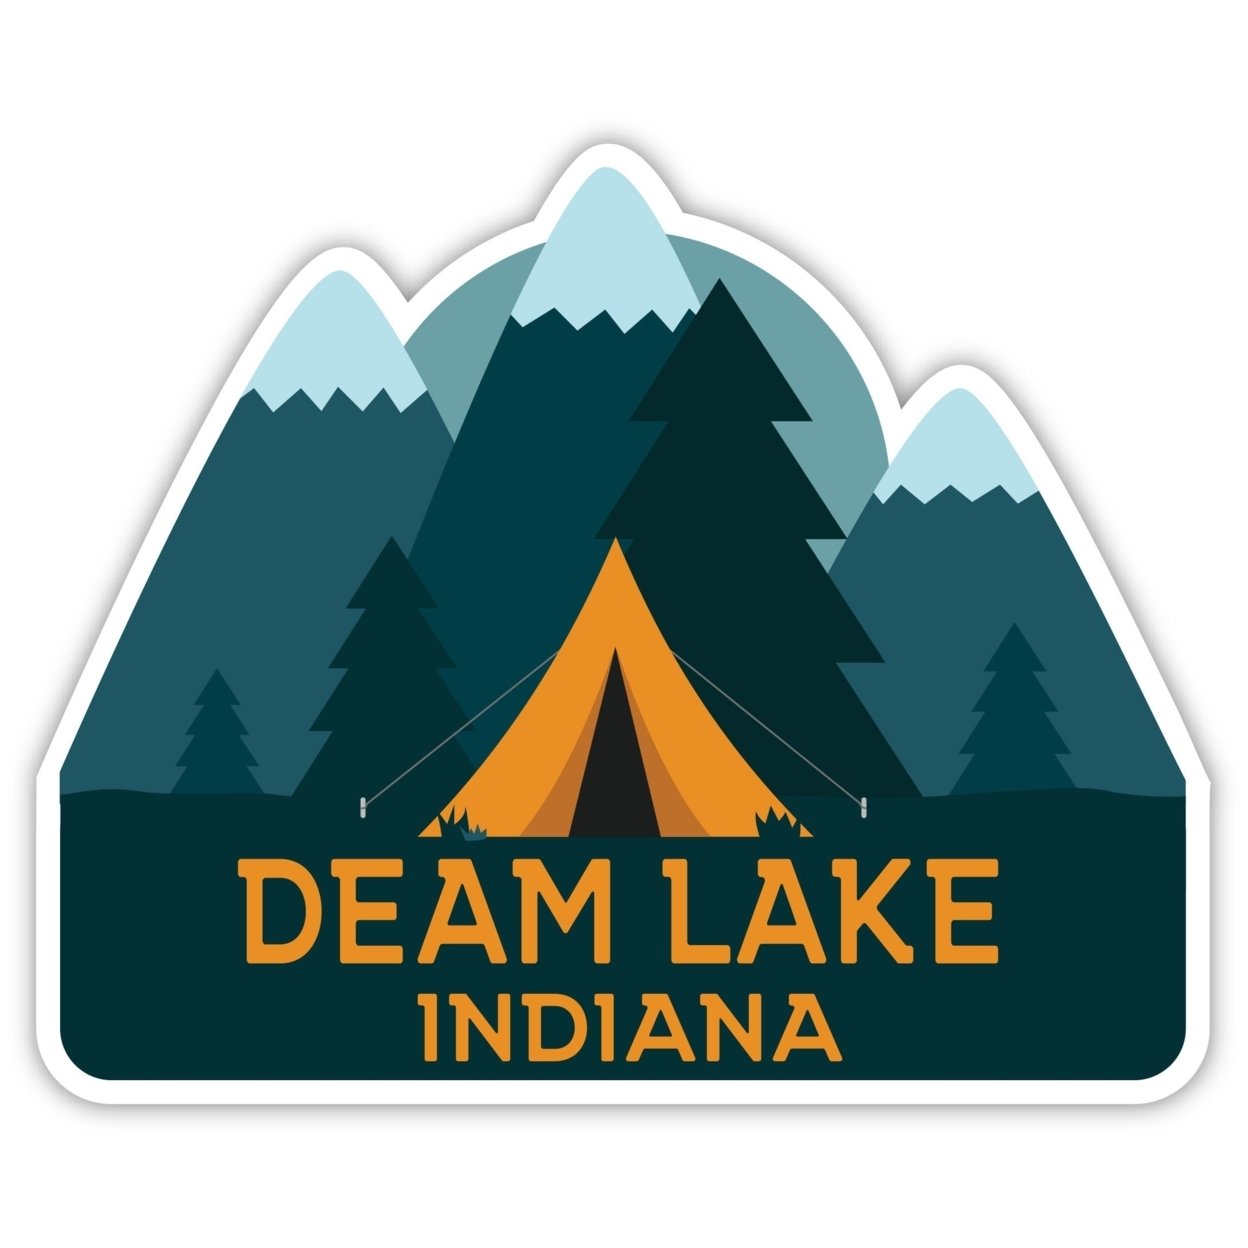 Deam Lake Indiana Souvenir Decorative Stickers (Choose Theme And Size) - 4-Pack, 8-Inch, Tent